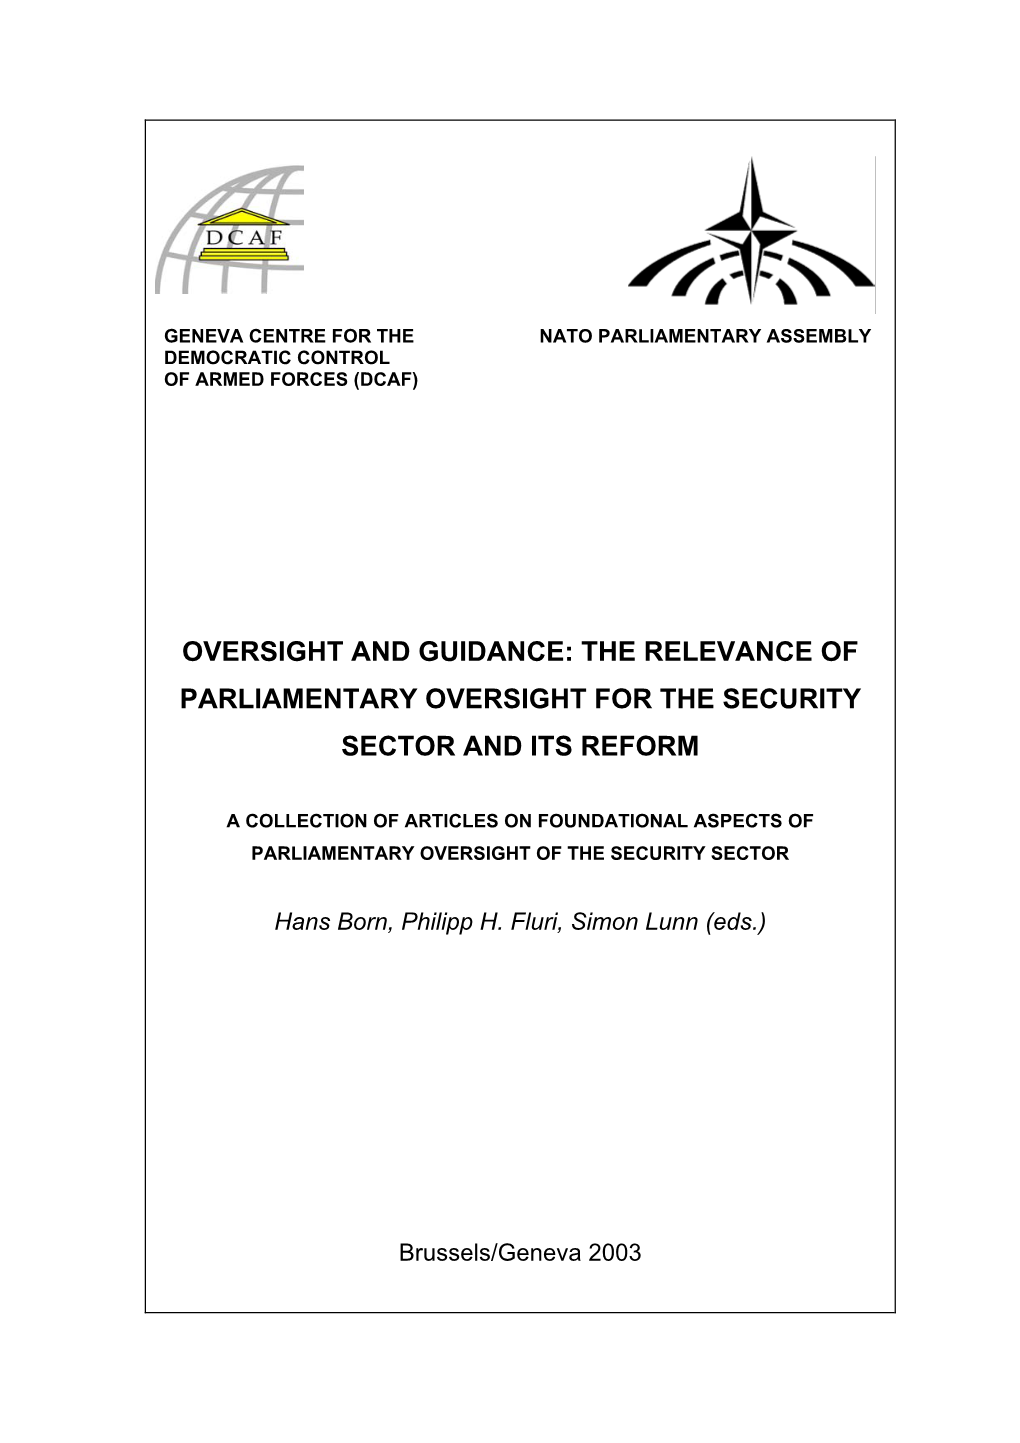 Oversight and Guidance: the Relevance of Parliamentary Oversight for the Security Sector and Its Reform